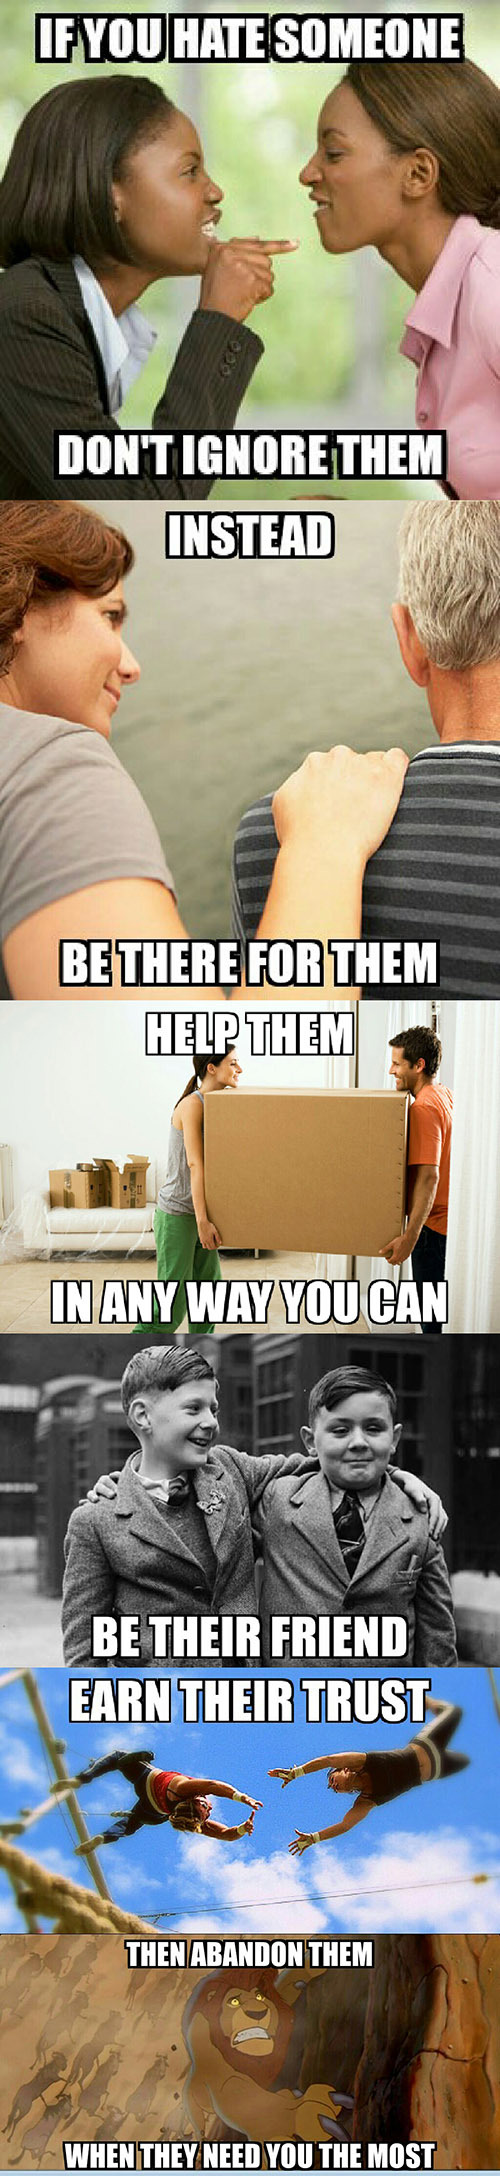 Just some helpful advice to those in need....  - meme